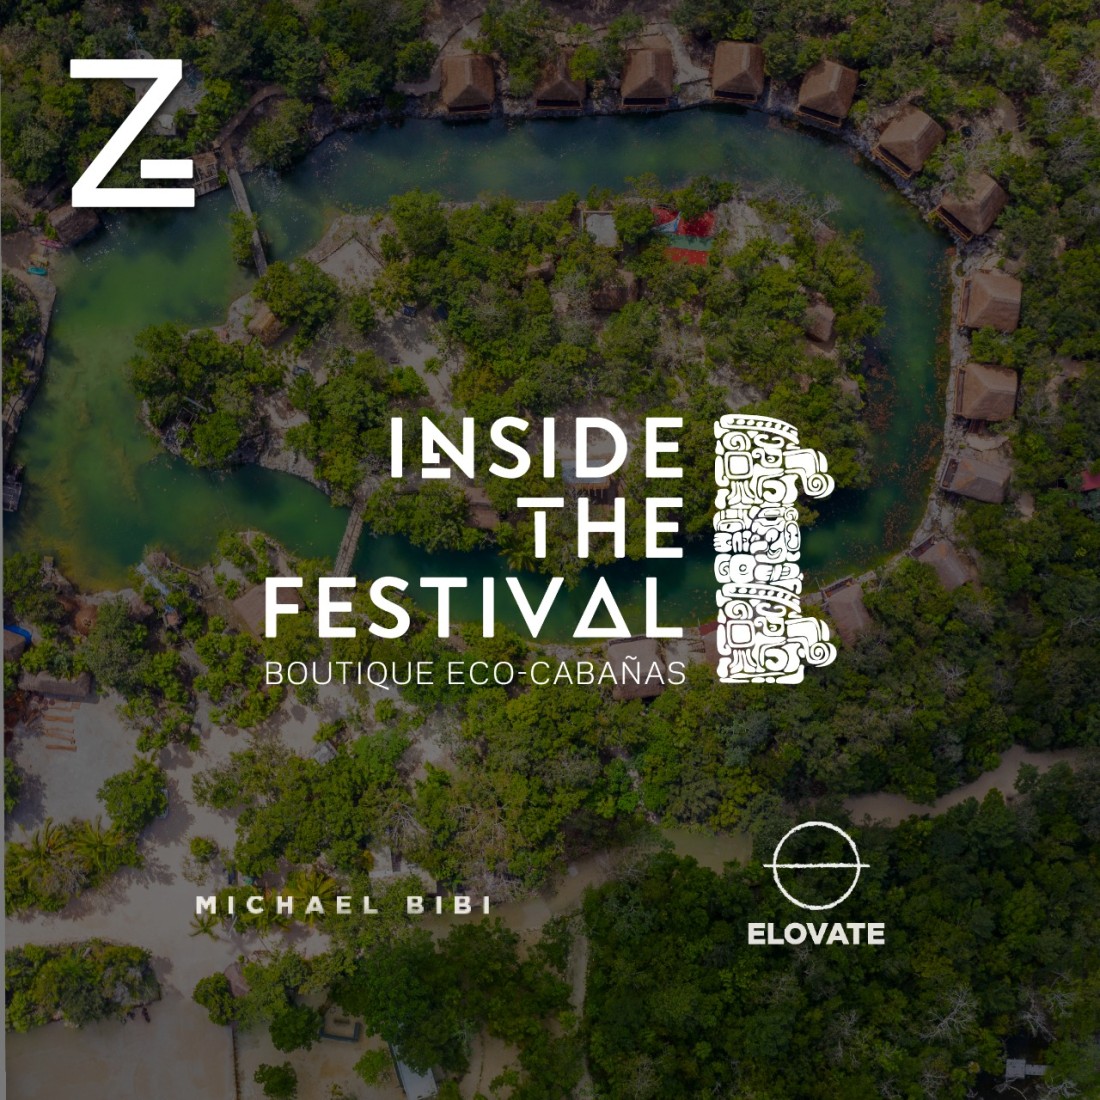 INSIDE THE FESTIVAL: 2 nights at Cabin + Backstage Tickets - ELOVATE